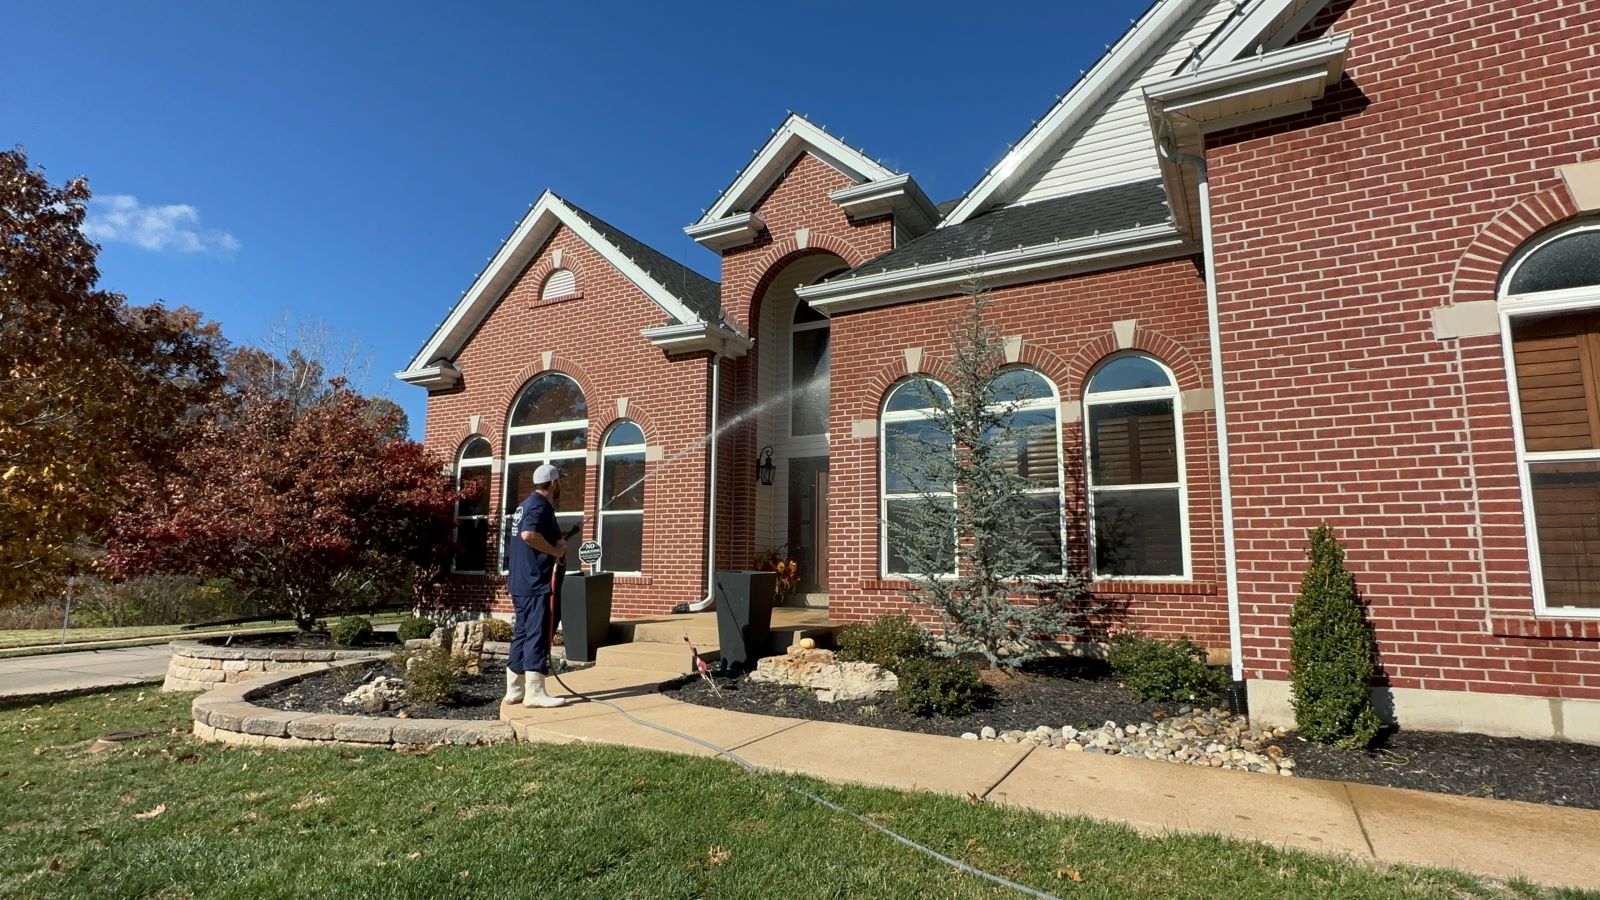 House Soft Washing in St. Louis, MO | Residential Exterior Cleaning Company Near Me 